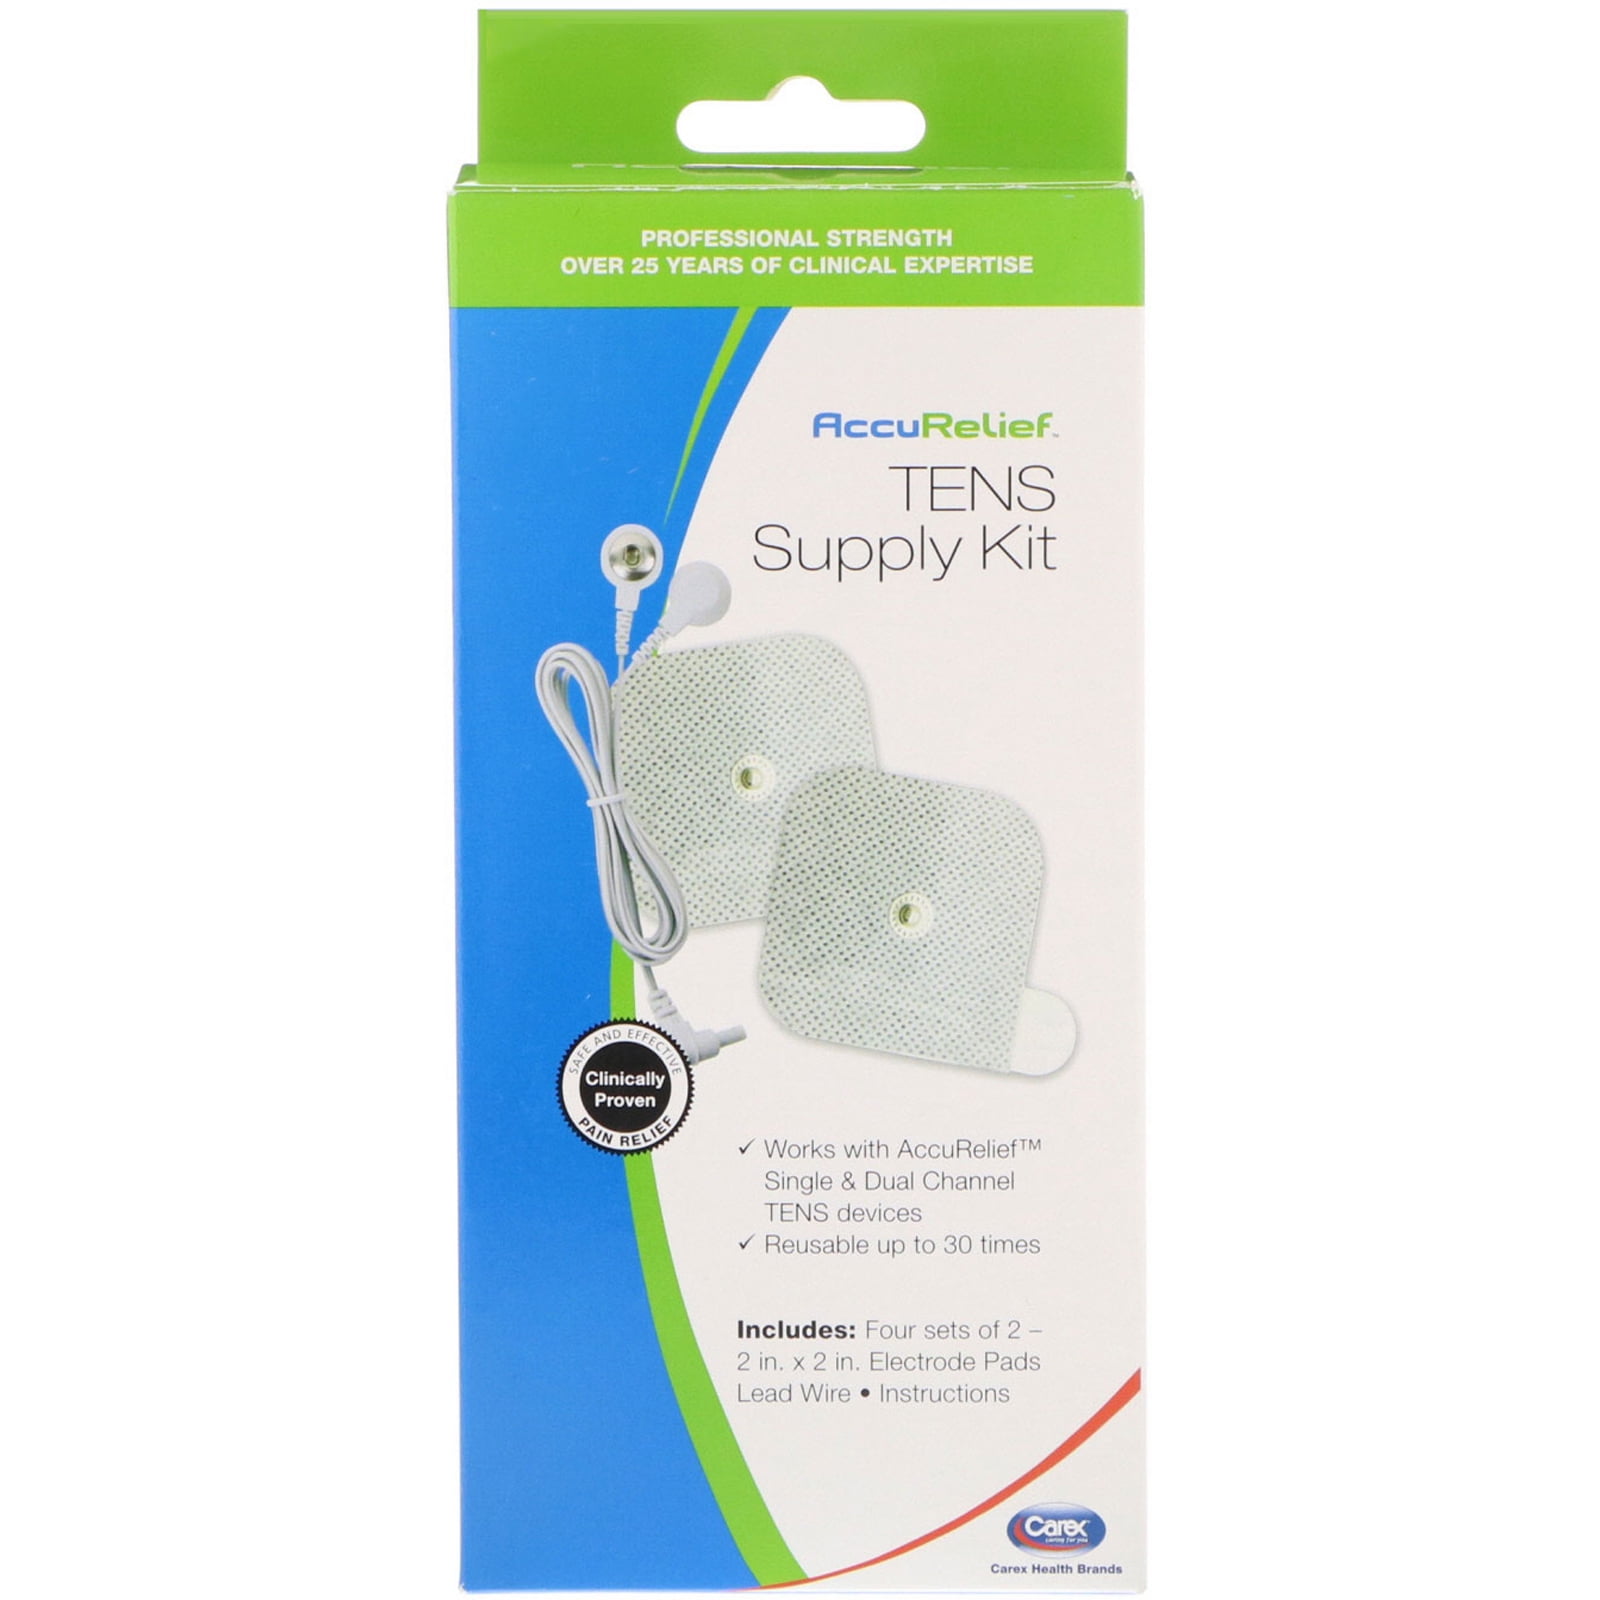 AccuRelief TENS Supply Kit 4 Sets of 2 Electrode Pads 1 Lead Wire